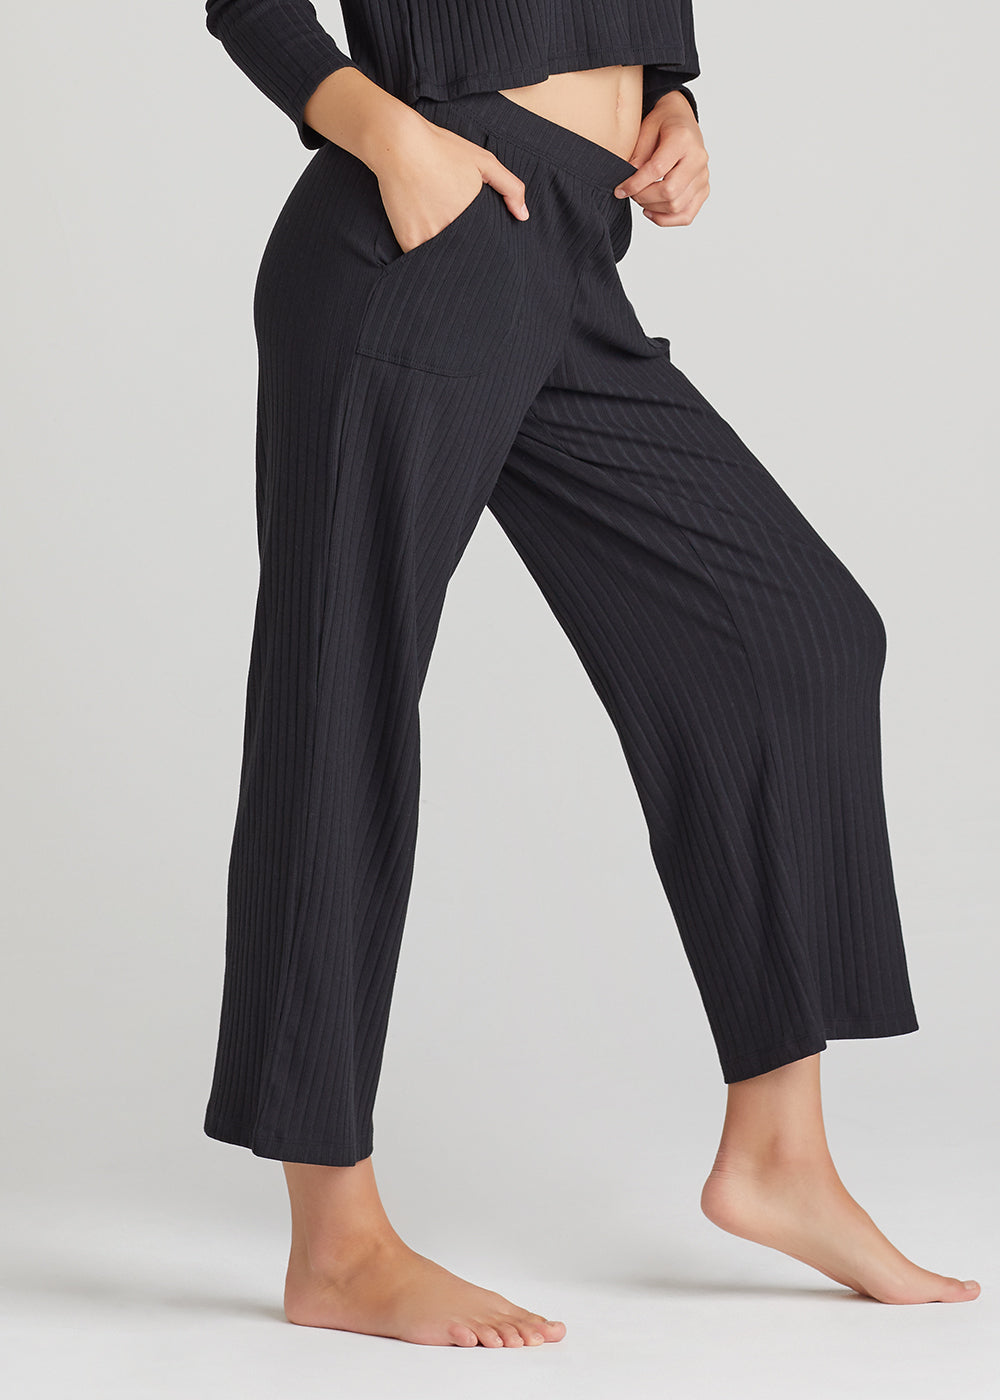 Cropped Lounge Pant - Cotton Rib from Yummie in Black  - 1